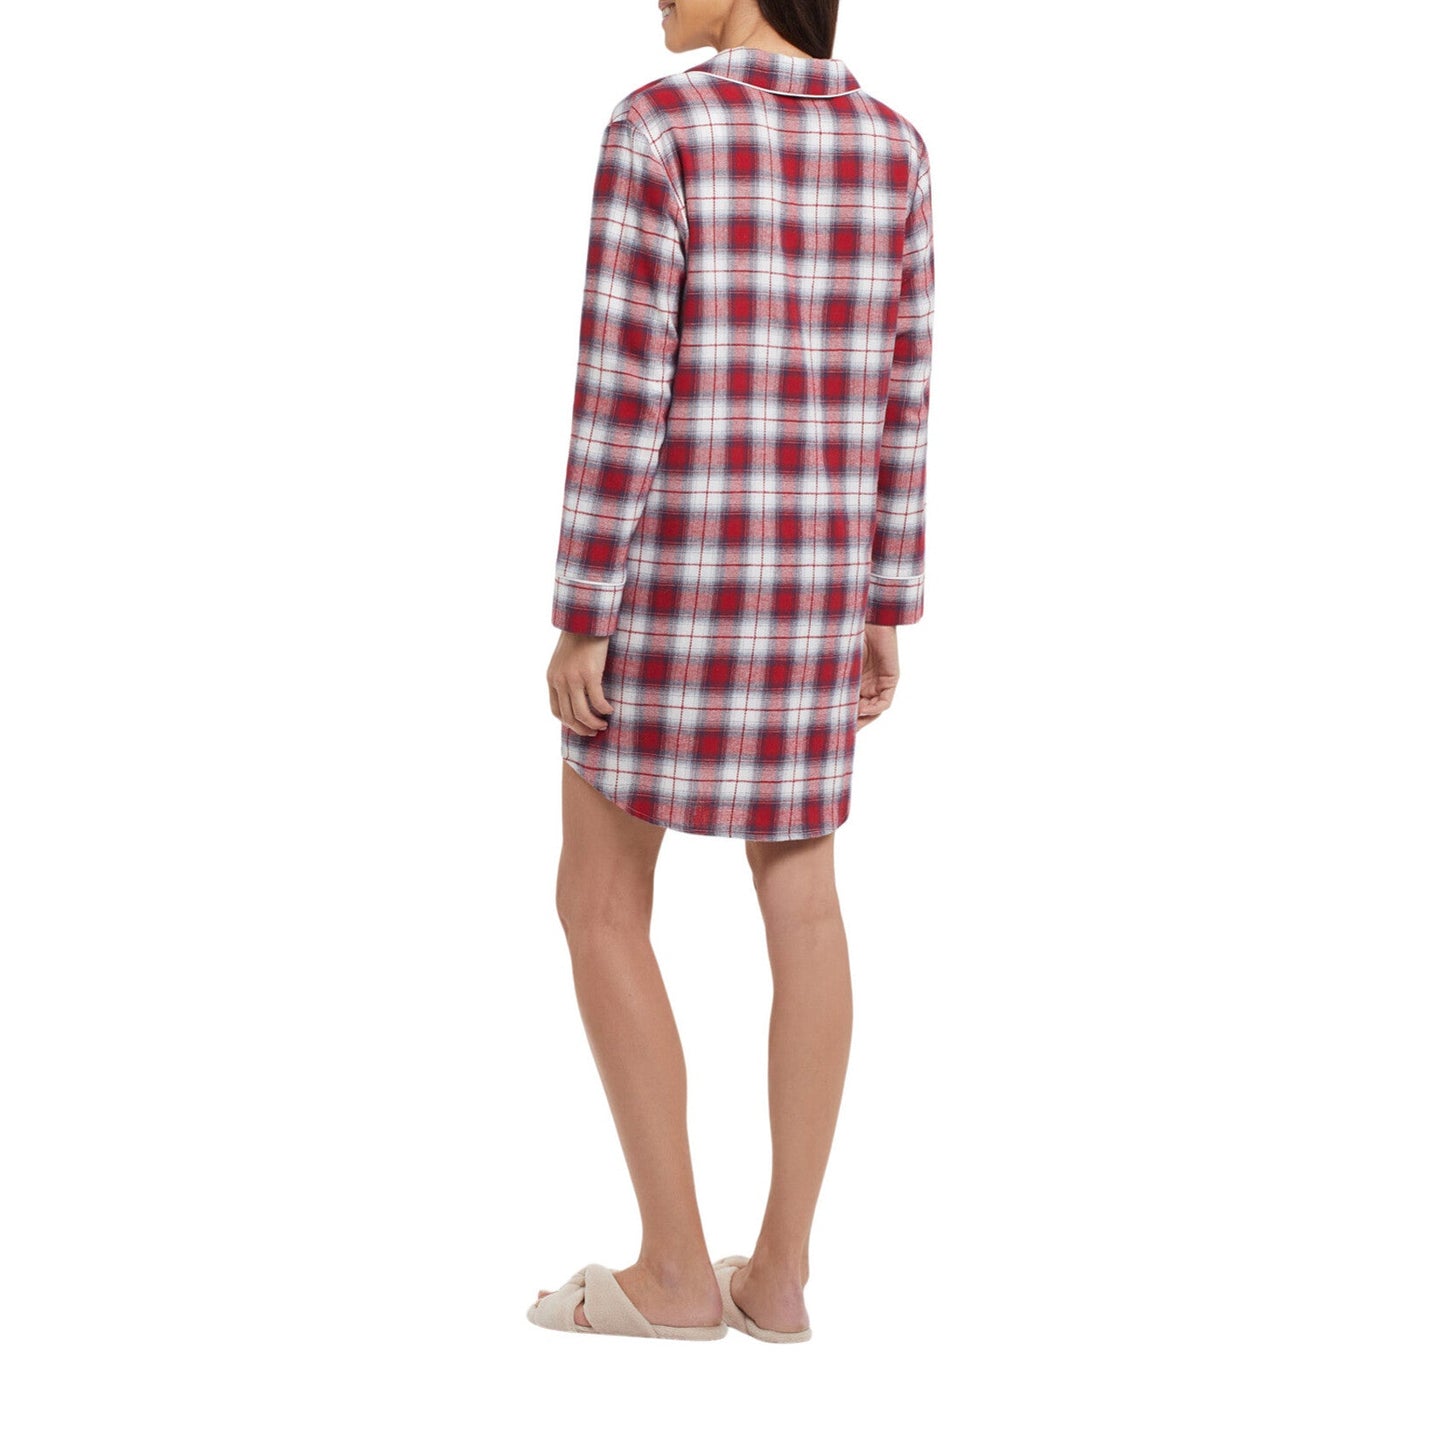 A woman wearing a Tribal Plaid Button Up Nightshirt.